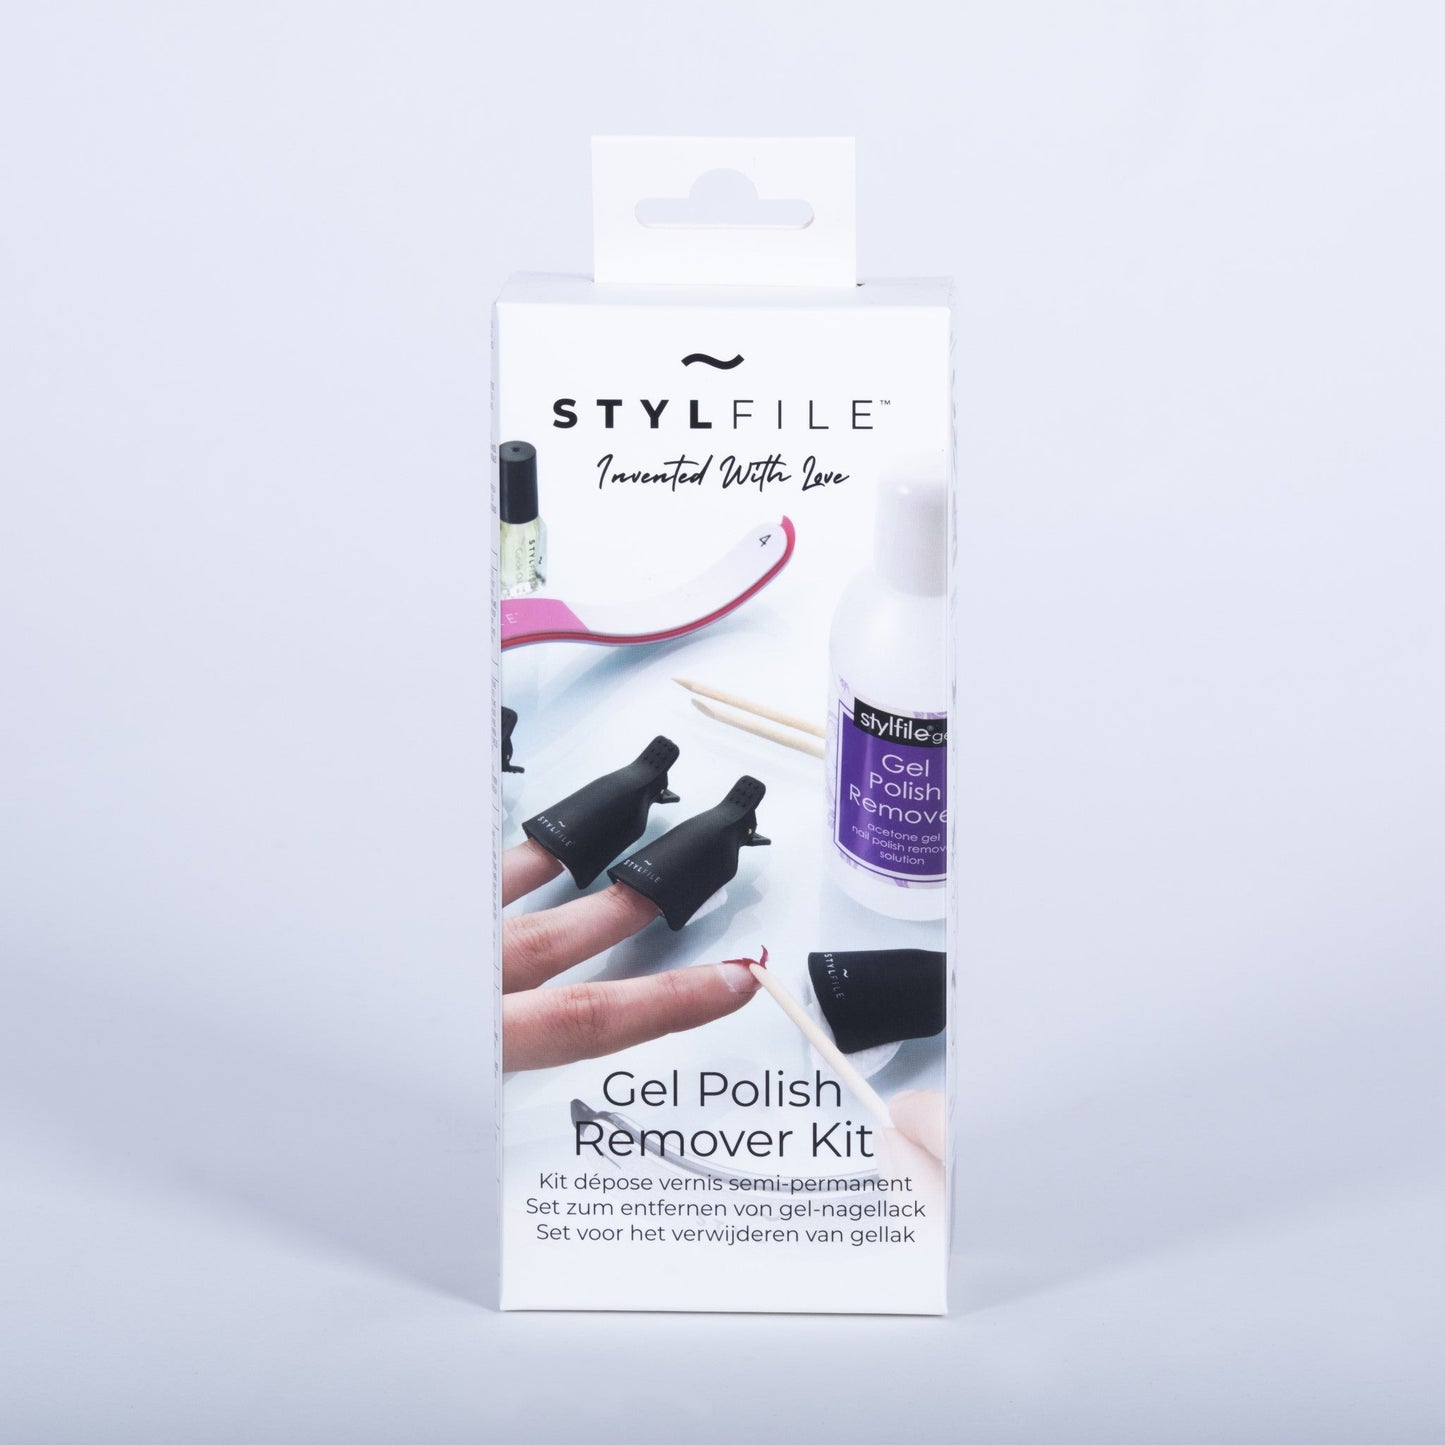 STYLFILE Gel Polish Remover Complete Kit